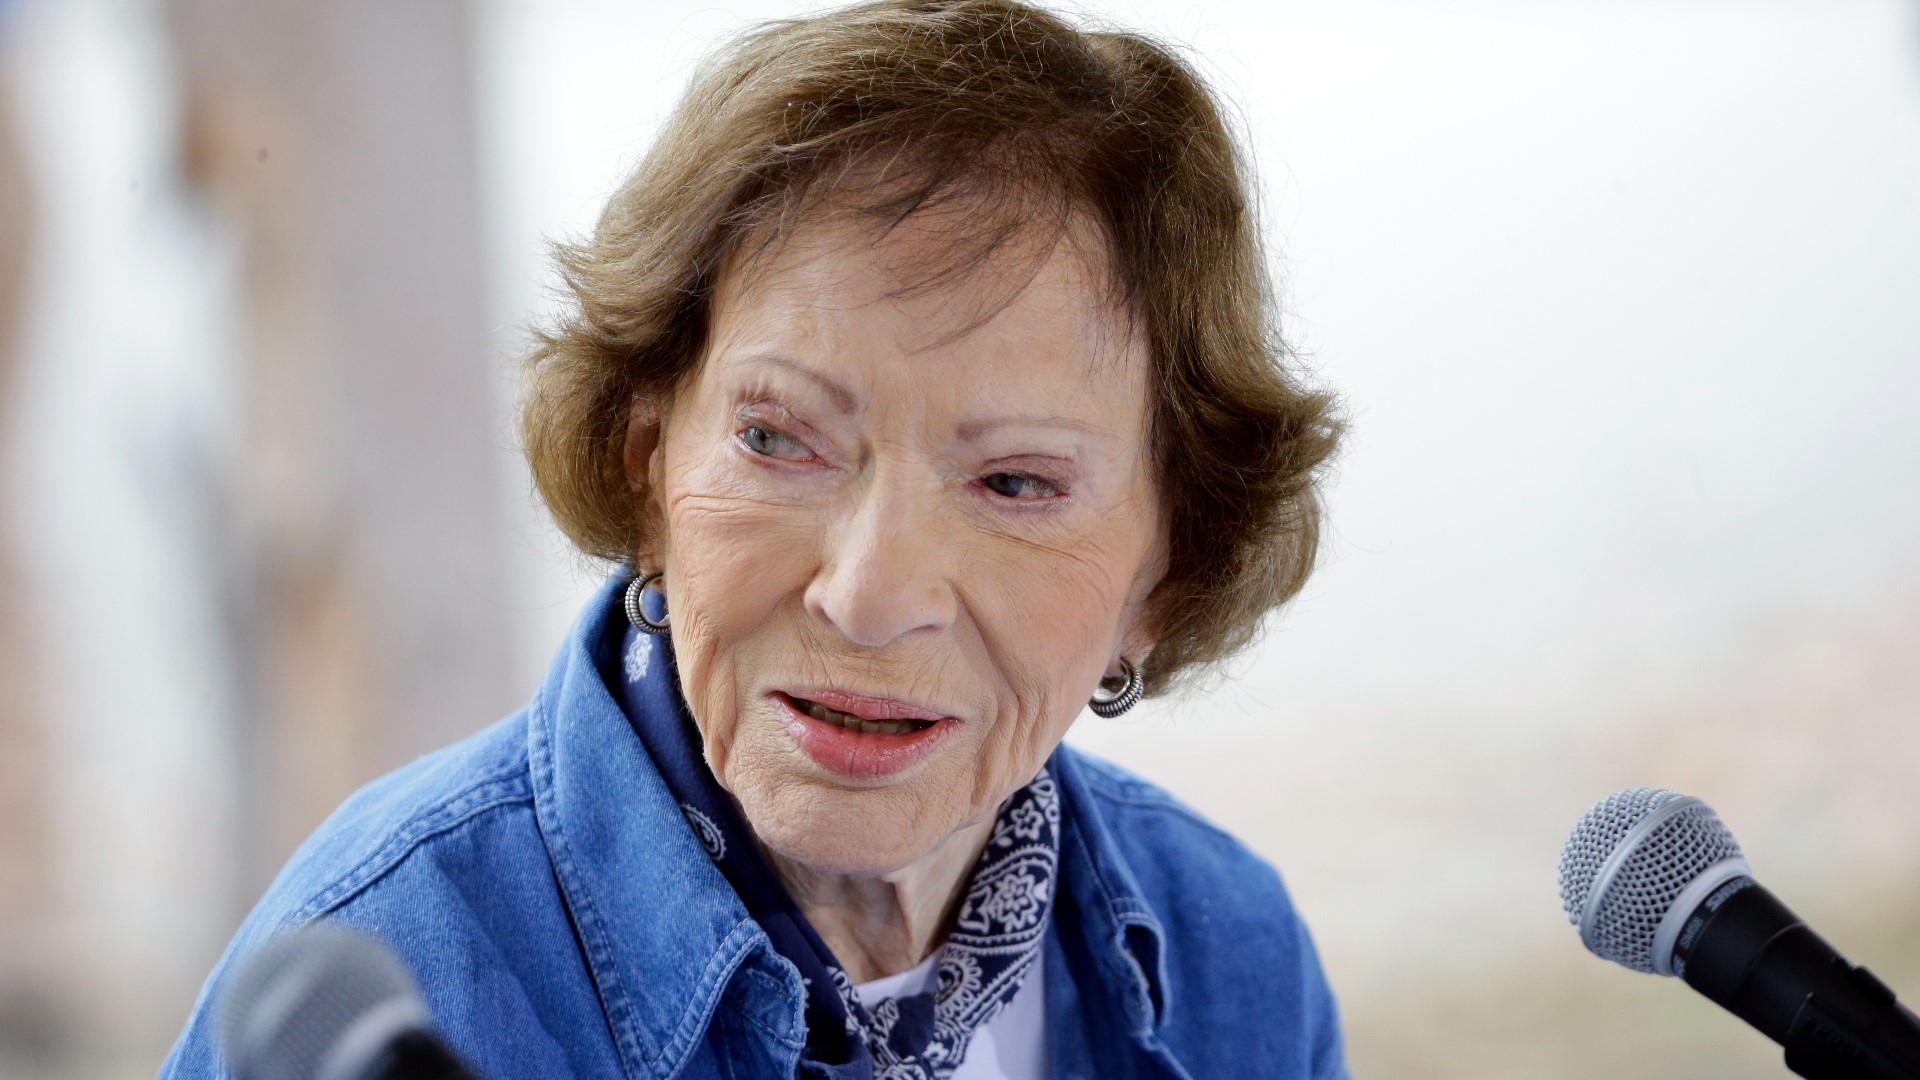 With word of her diagnosis, Rosalynn Carter, known as "the first lady of mental health" continues her work to raise awareness for caregivers and care.